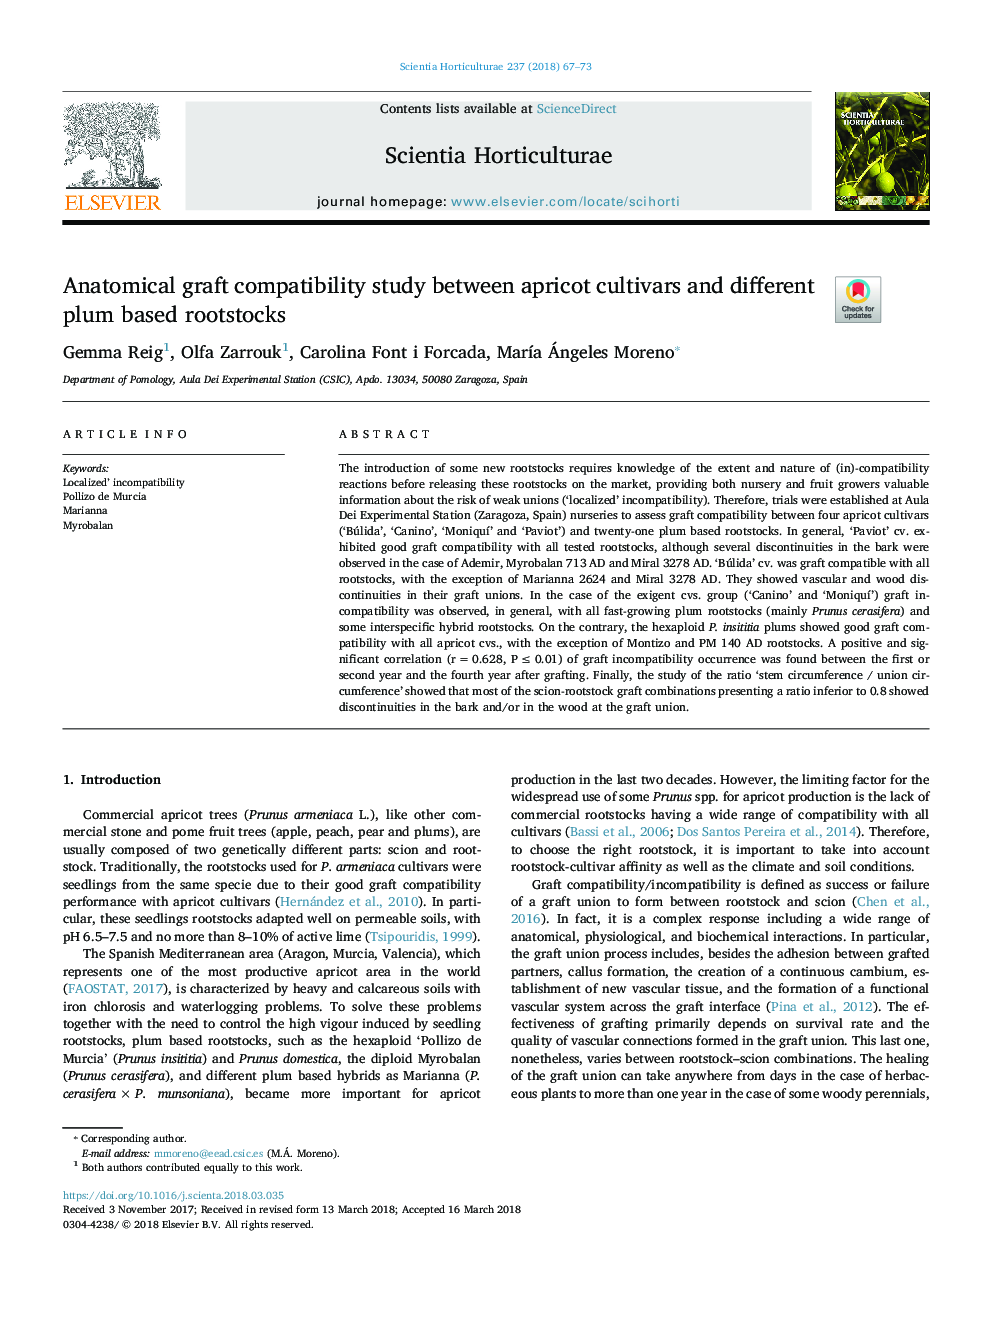 Anatomical graft compatibility study between apricot cultivars and different plum based rootstocks